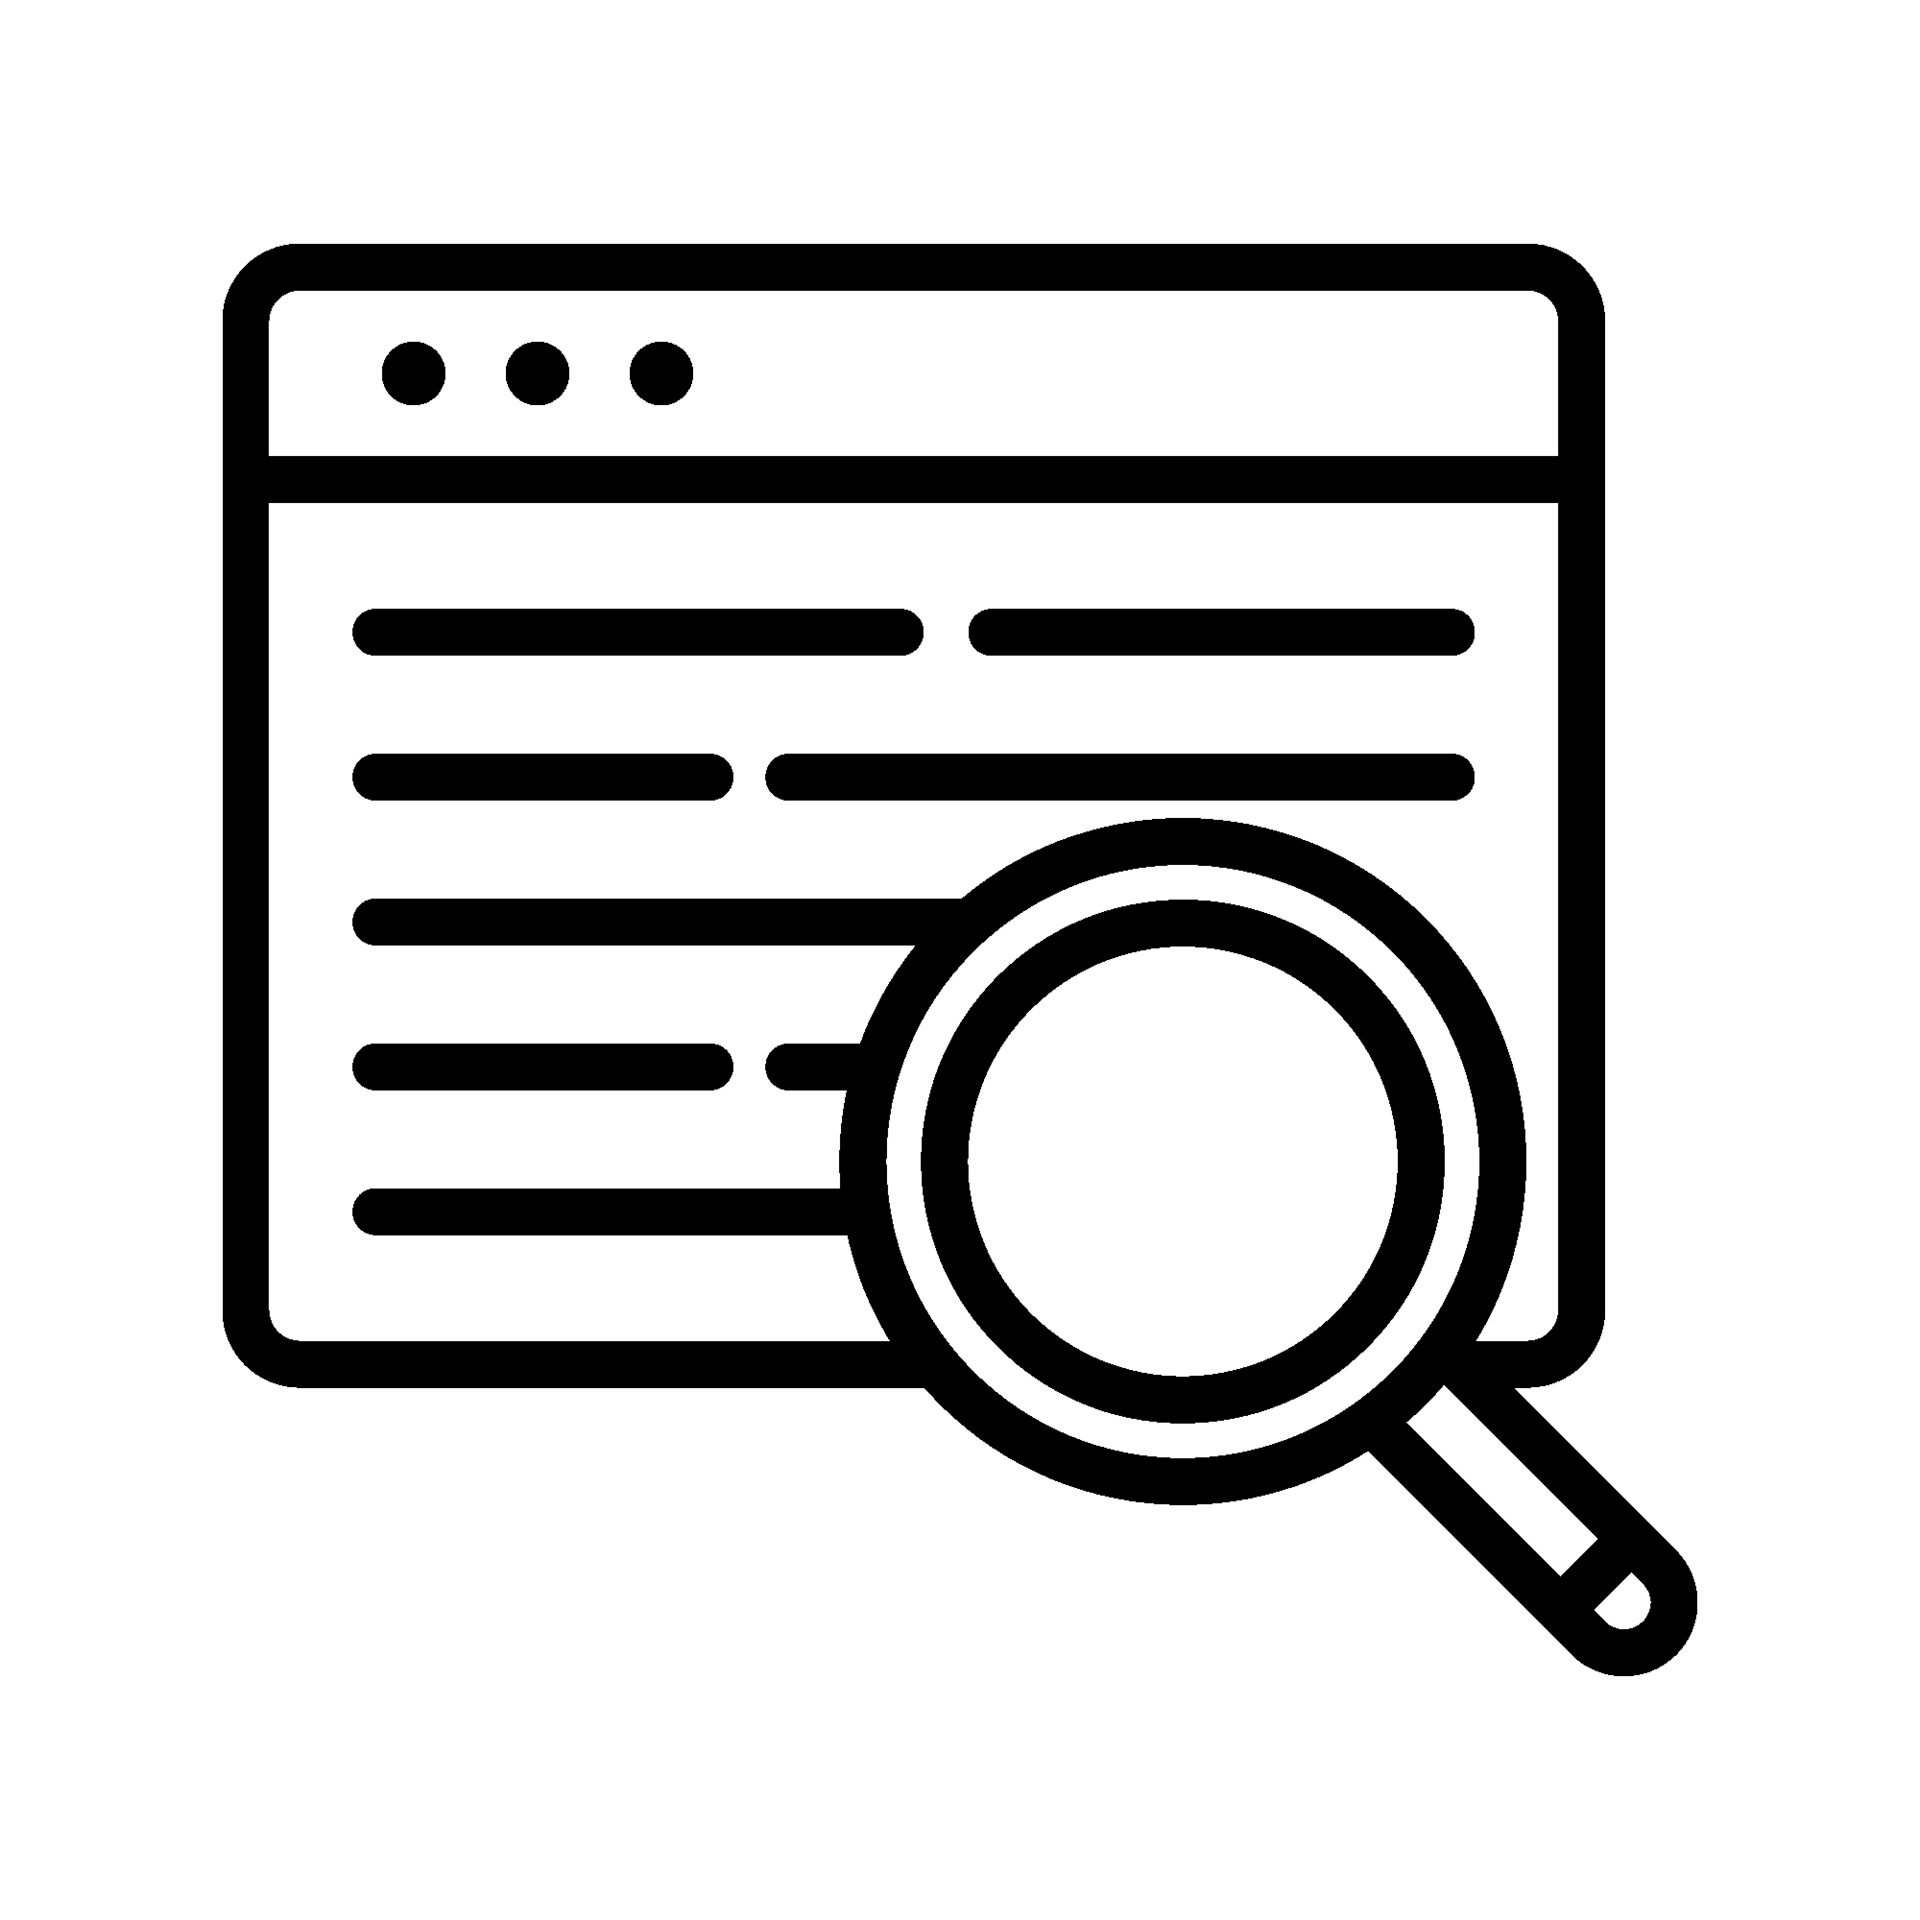 content-research-icon-free-vector